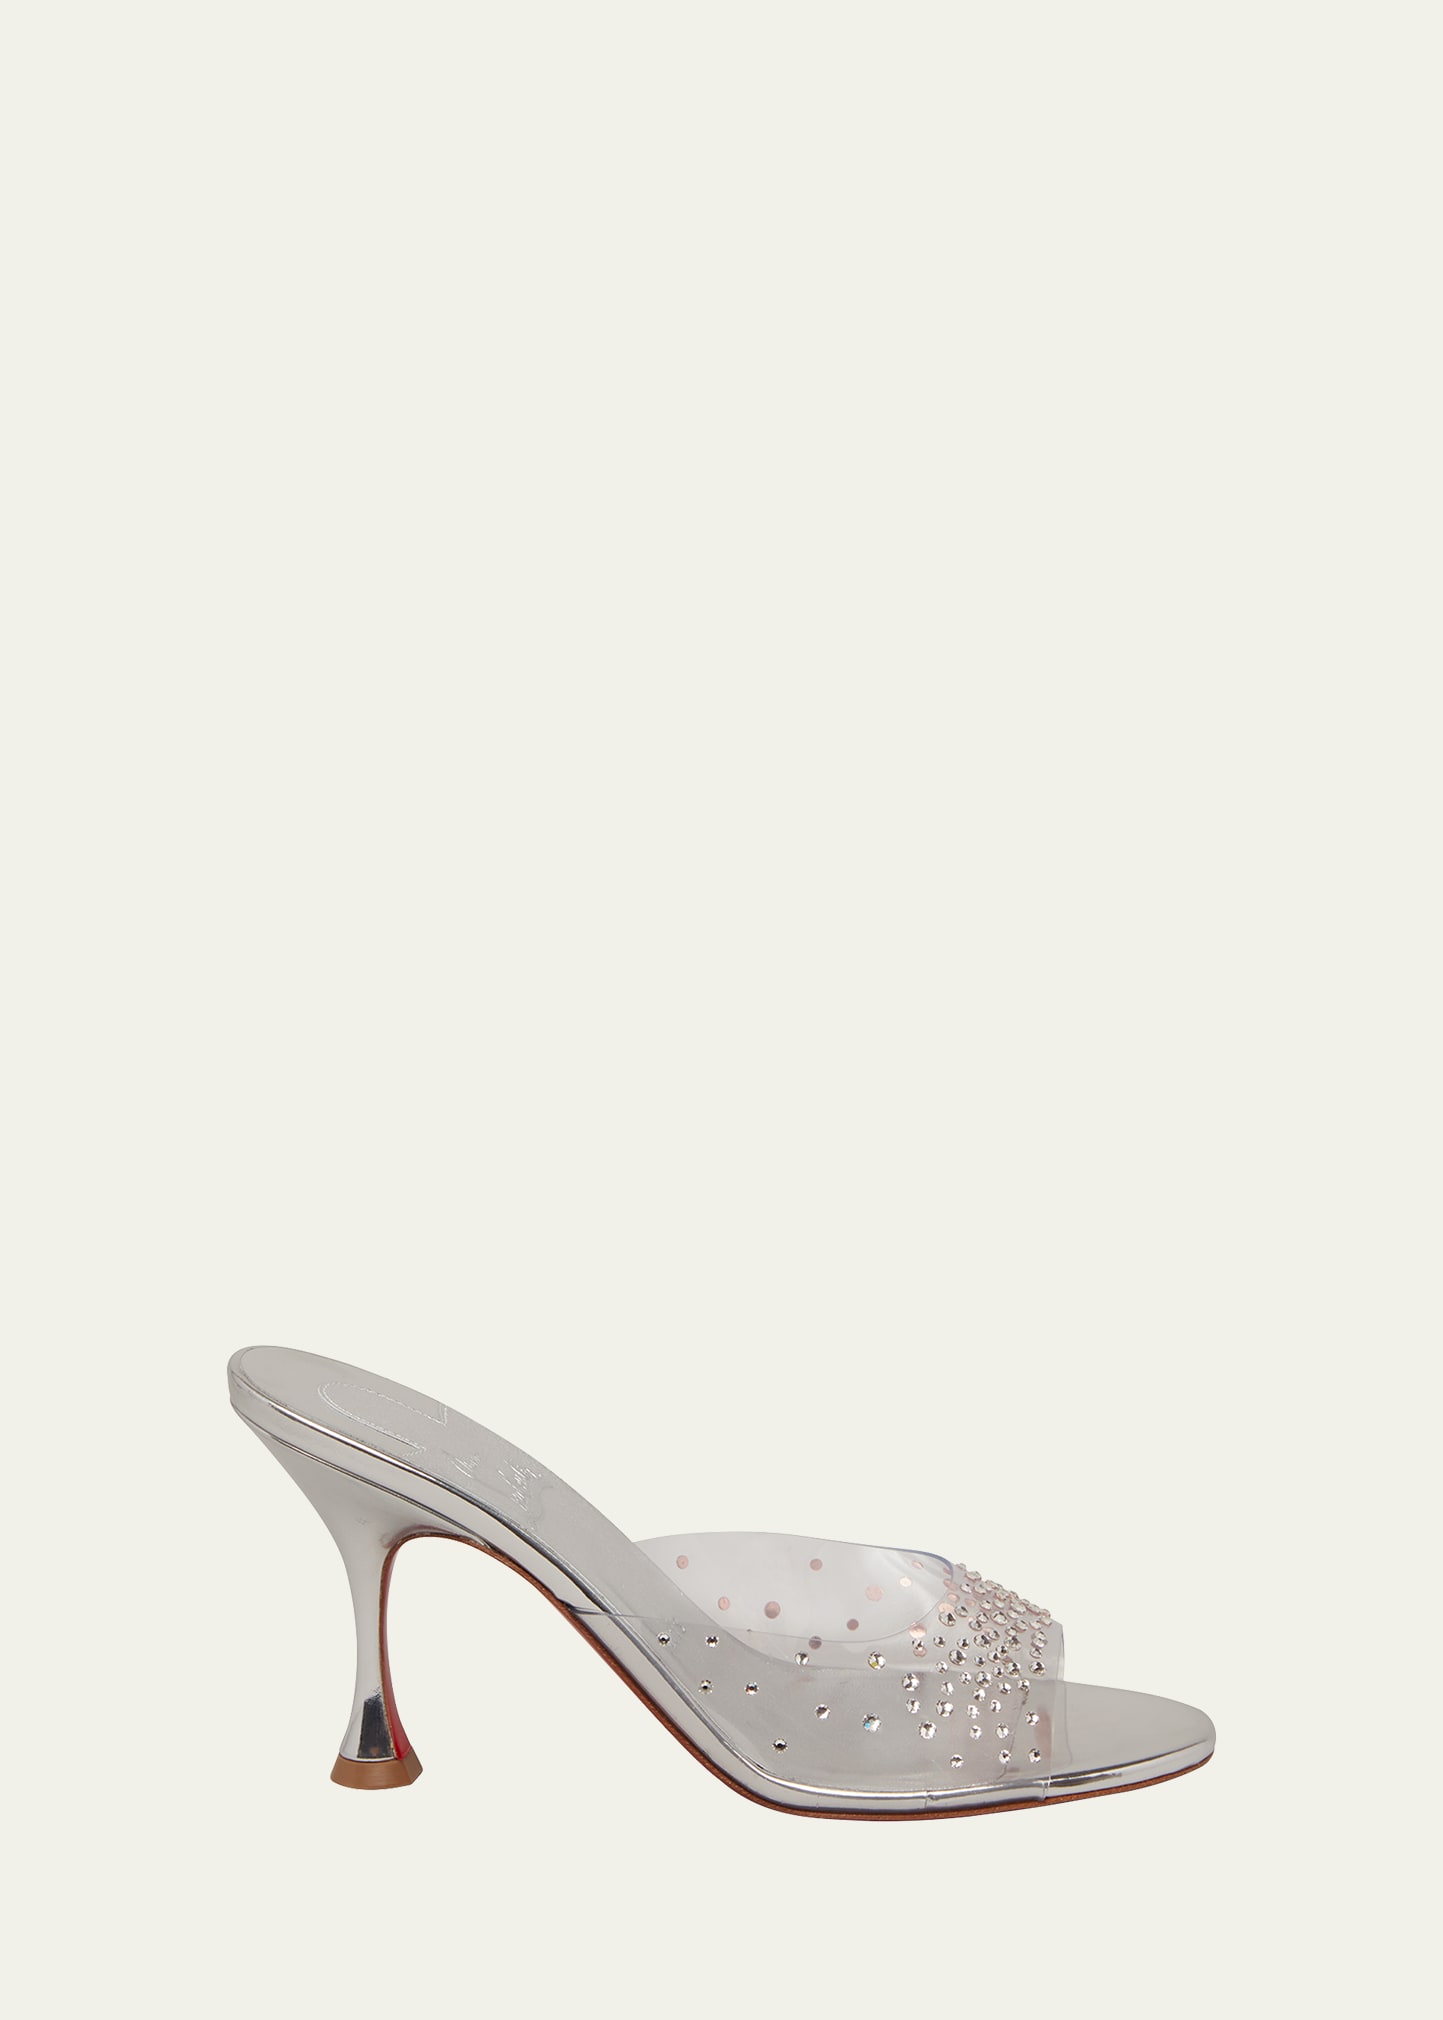 Christian Louboutin Degramule Strass Clear Stiletto Sandals